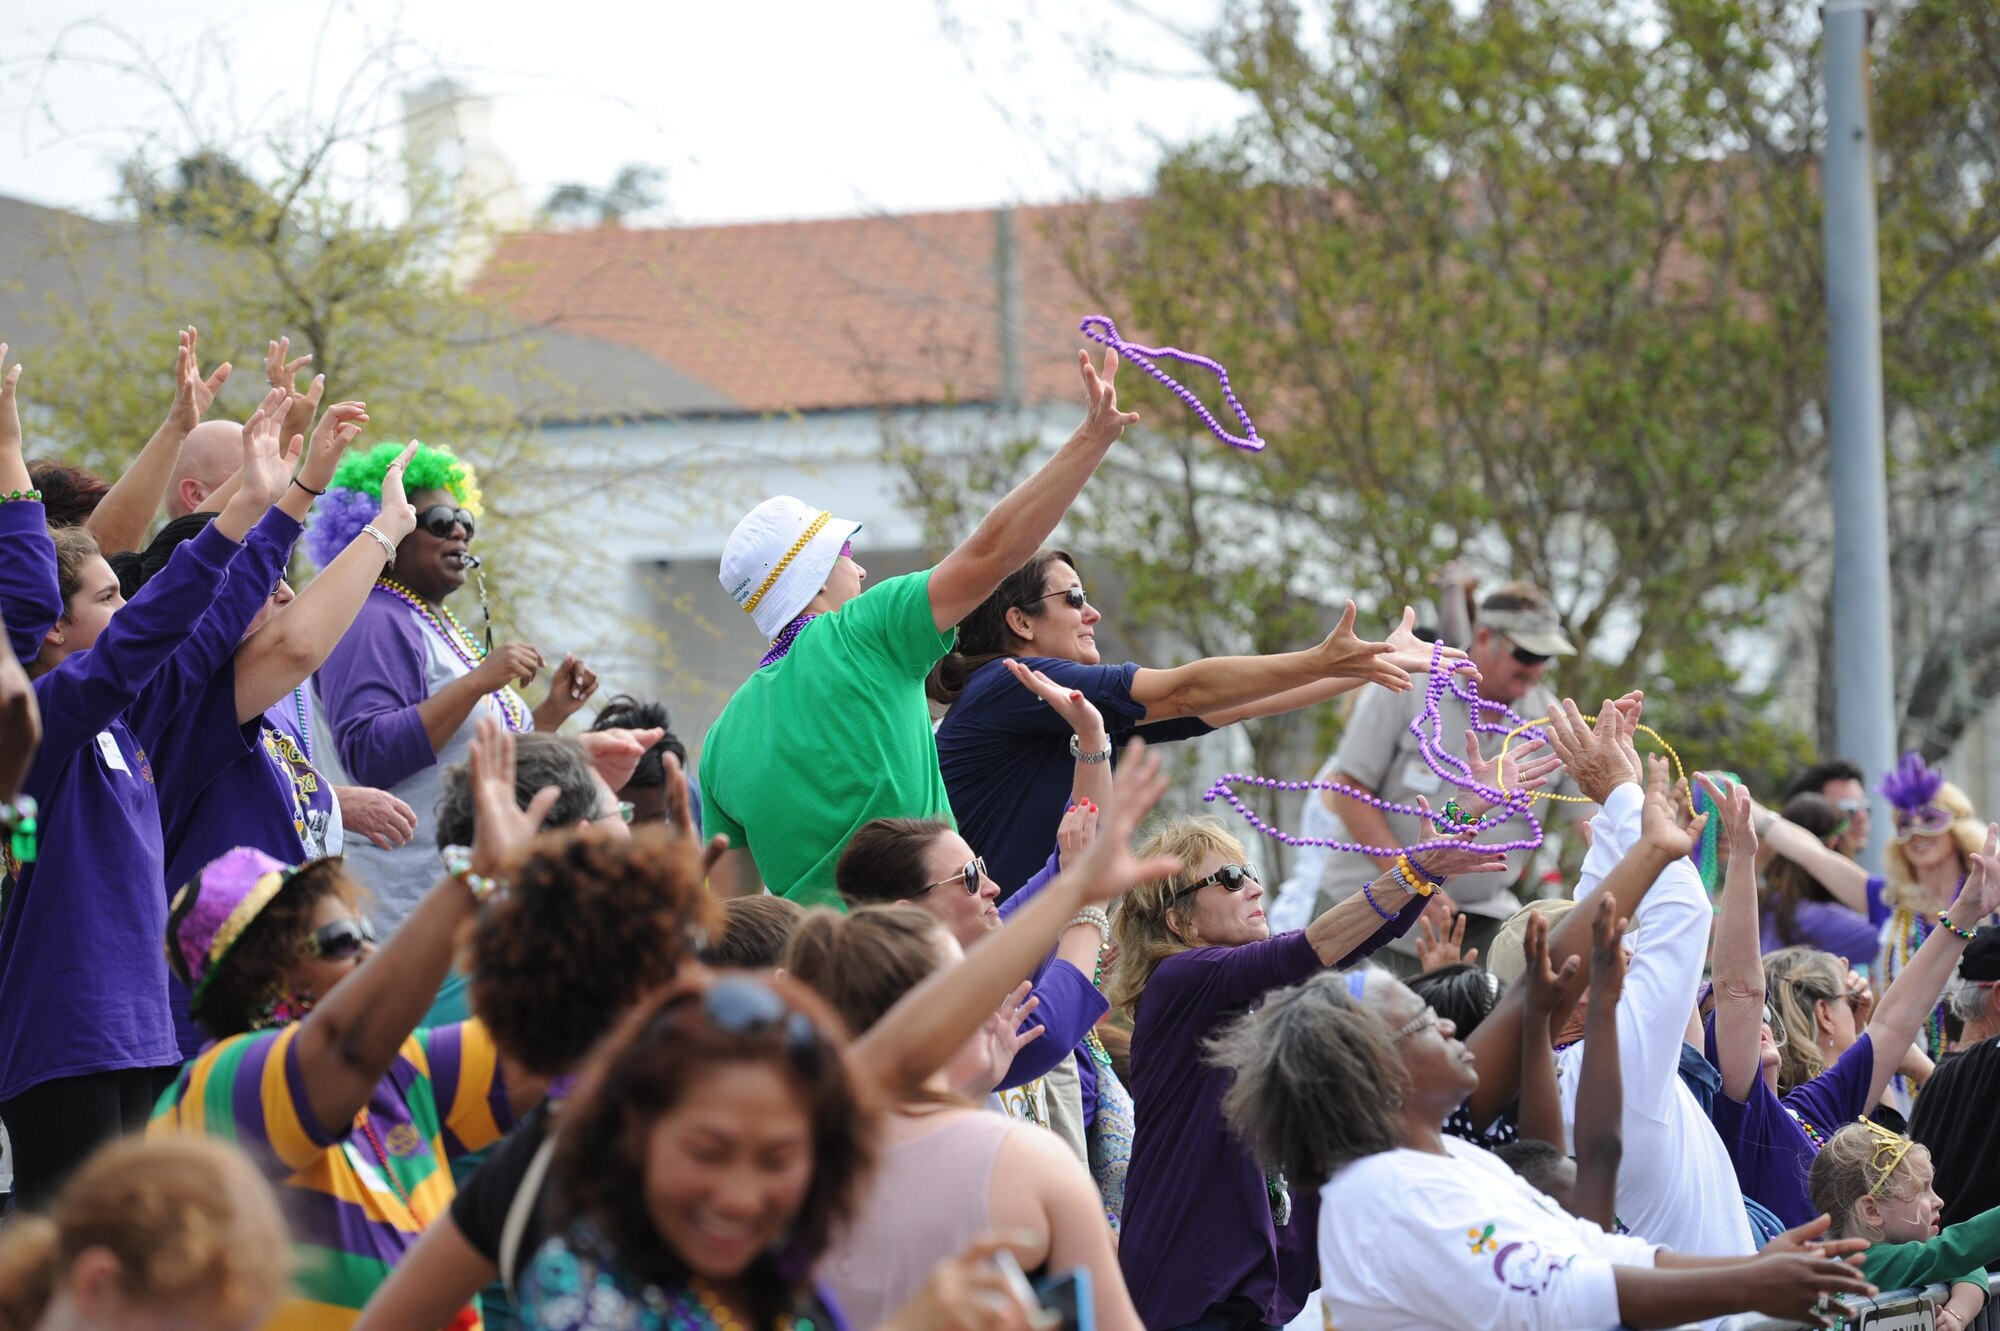 Kristi and Mac Smith, family of Col. C. Mike Smith, 81st Training Wing vice commander, catch beads during the Gulf Coast Carnival Association Mardi Gras parade Feb. 28, 2017, in Biloxi, Miss. Every Mardi Gras season, Keesler personnel participate in local parades to show their support of the communities surrounding the installation. (U.S. Air Force photo by Kemberly Groue)